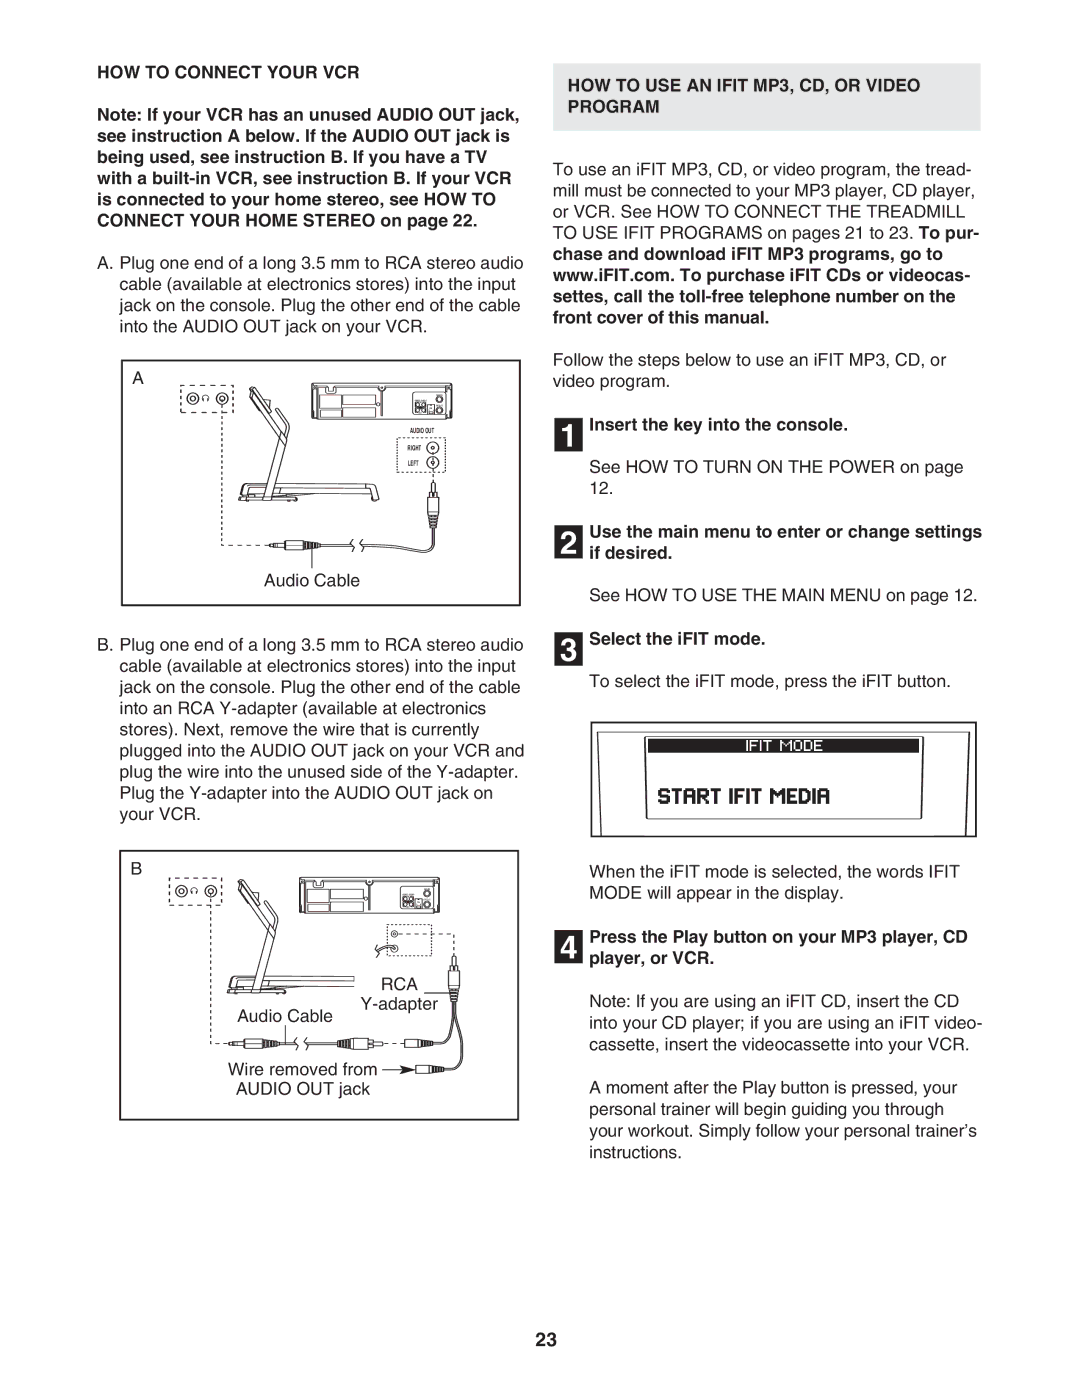 NordicTrack 30601.0 user manual HOW to Connect Your VCR, HOW to USE AN Ifit MP3, CD, or Video Program, Select the iFIT mode 